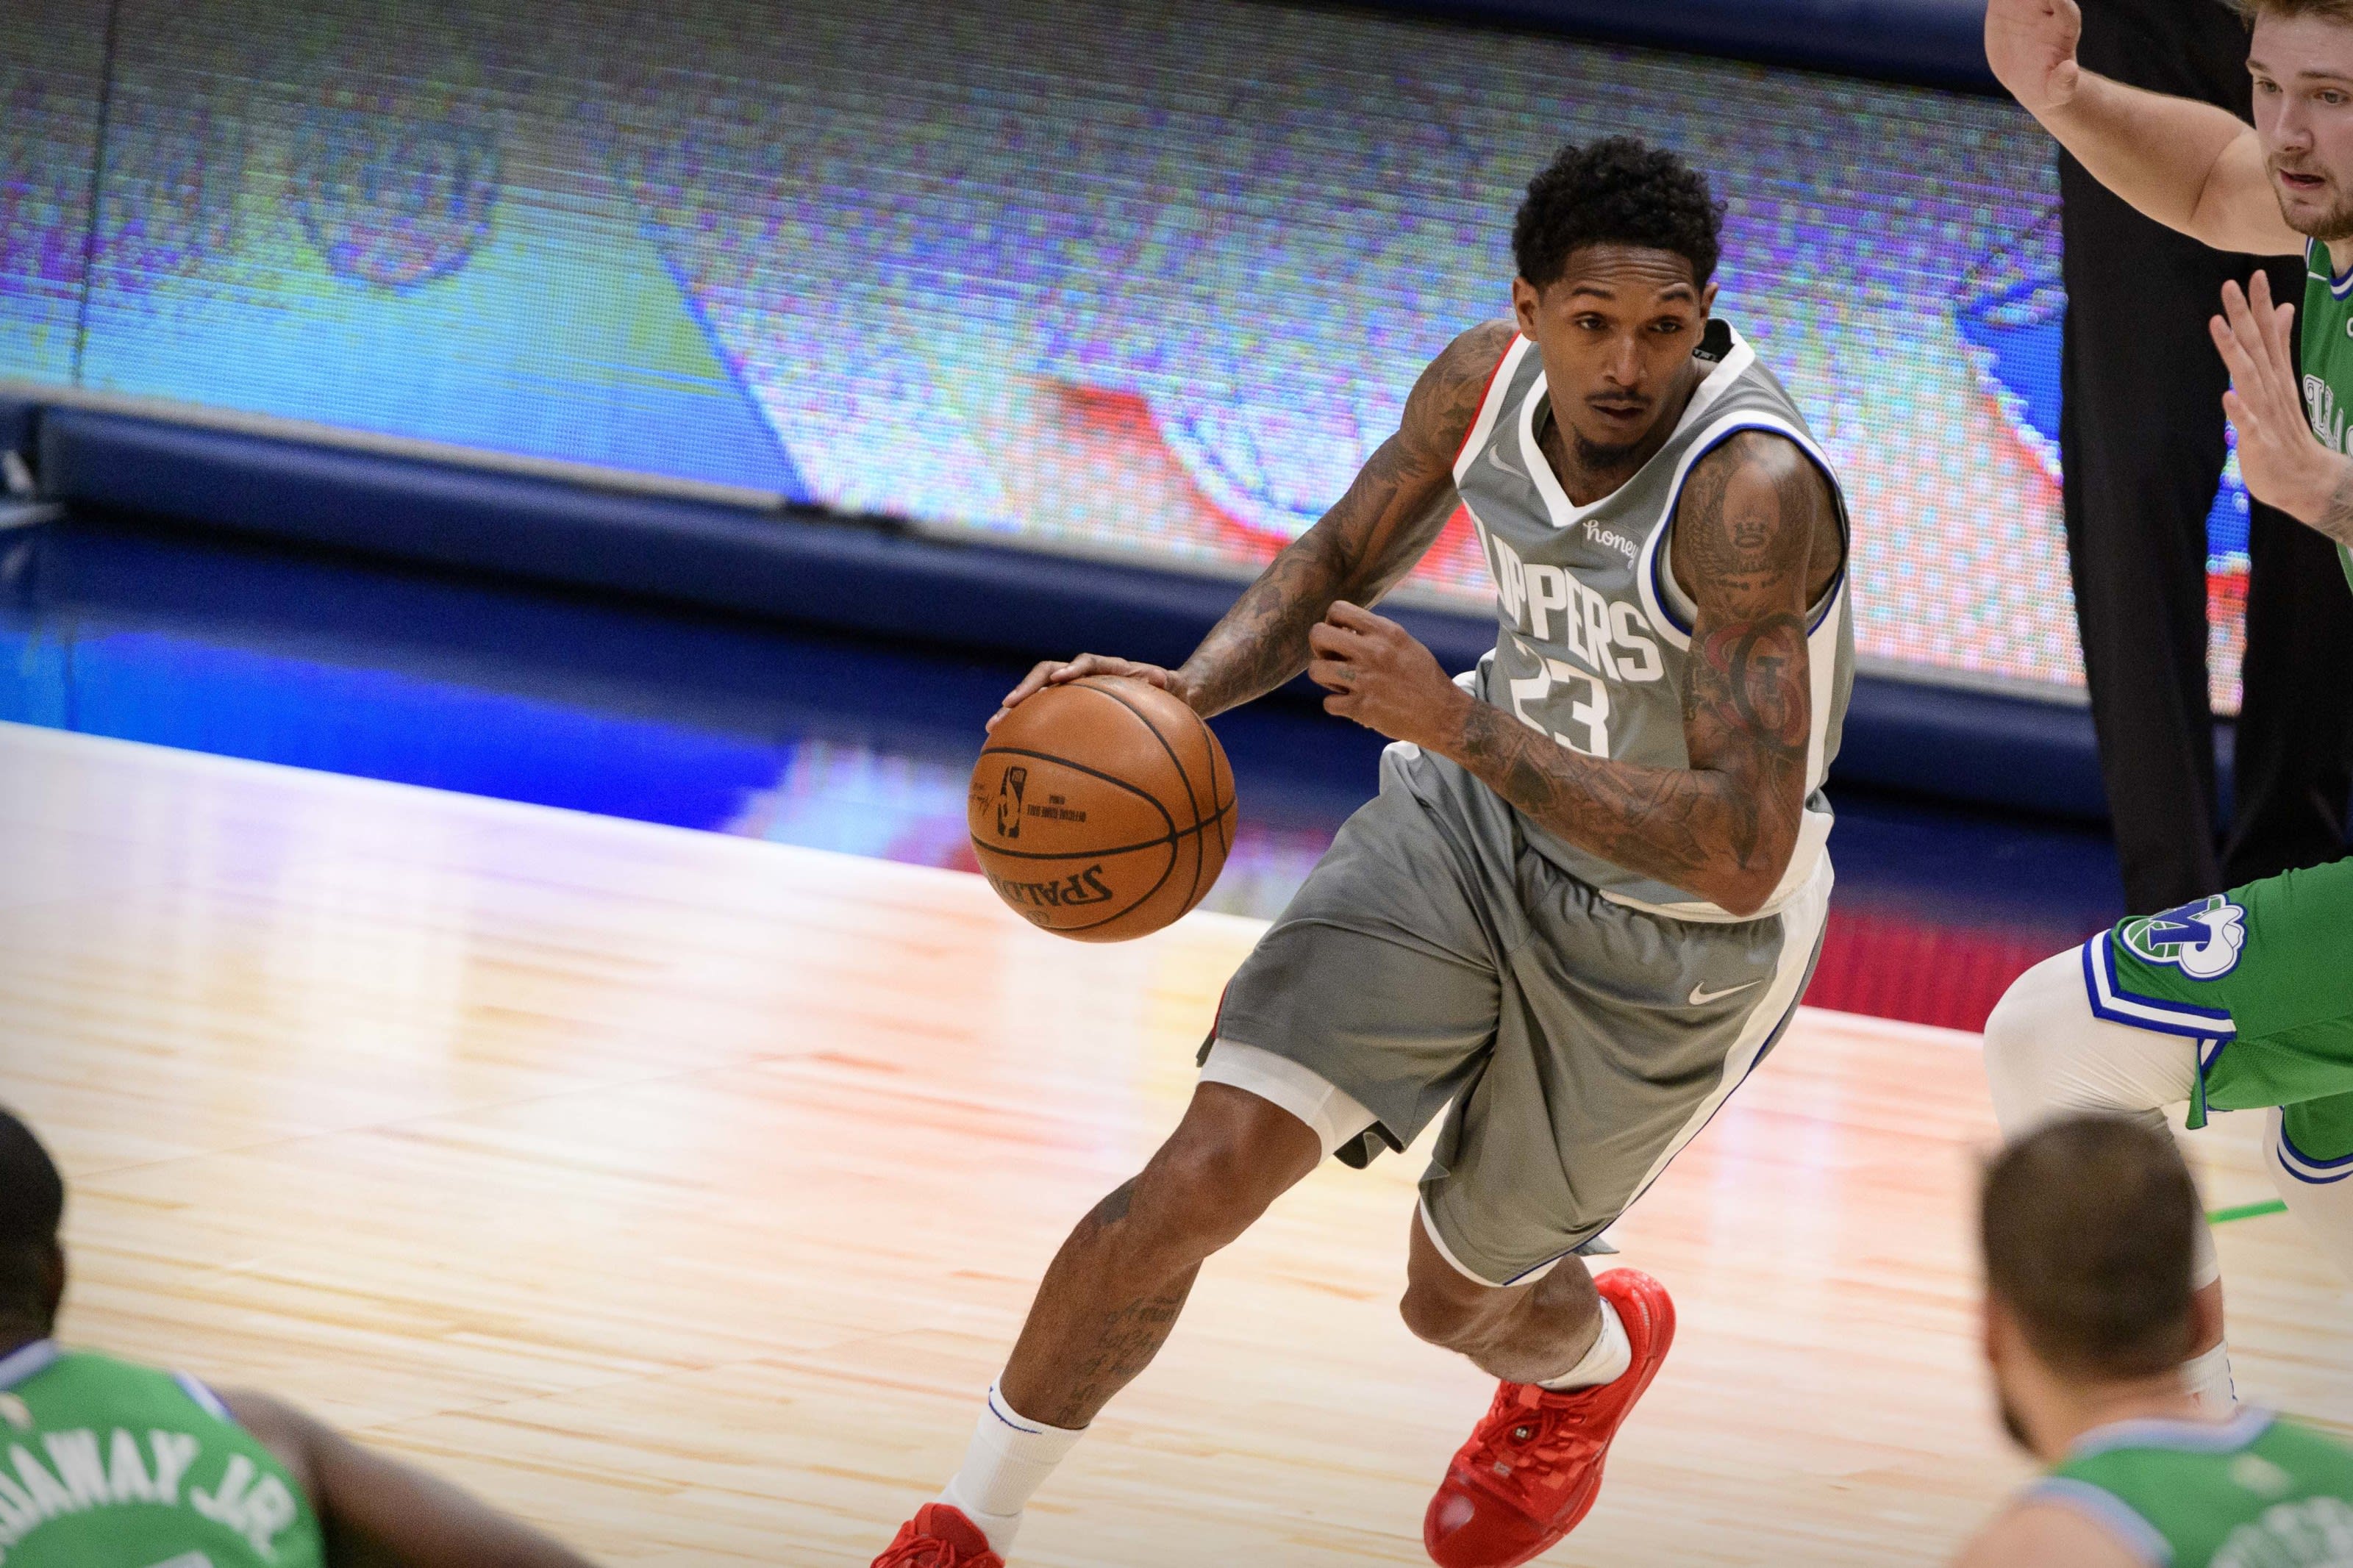 Lou Williams Wallpapers